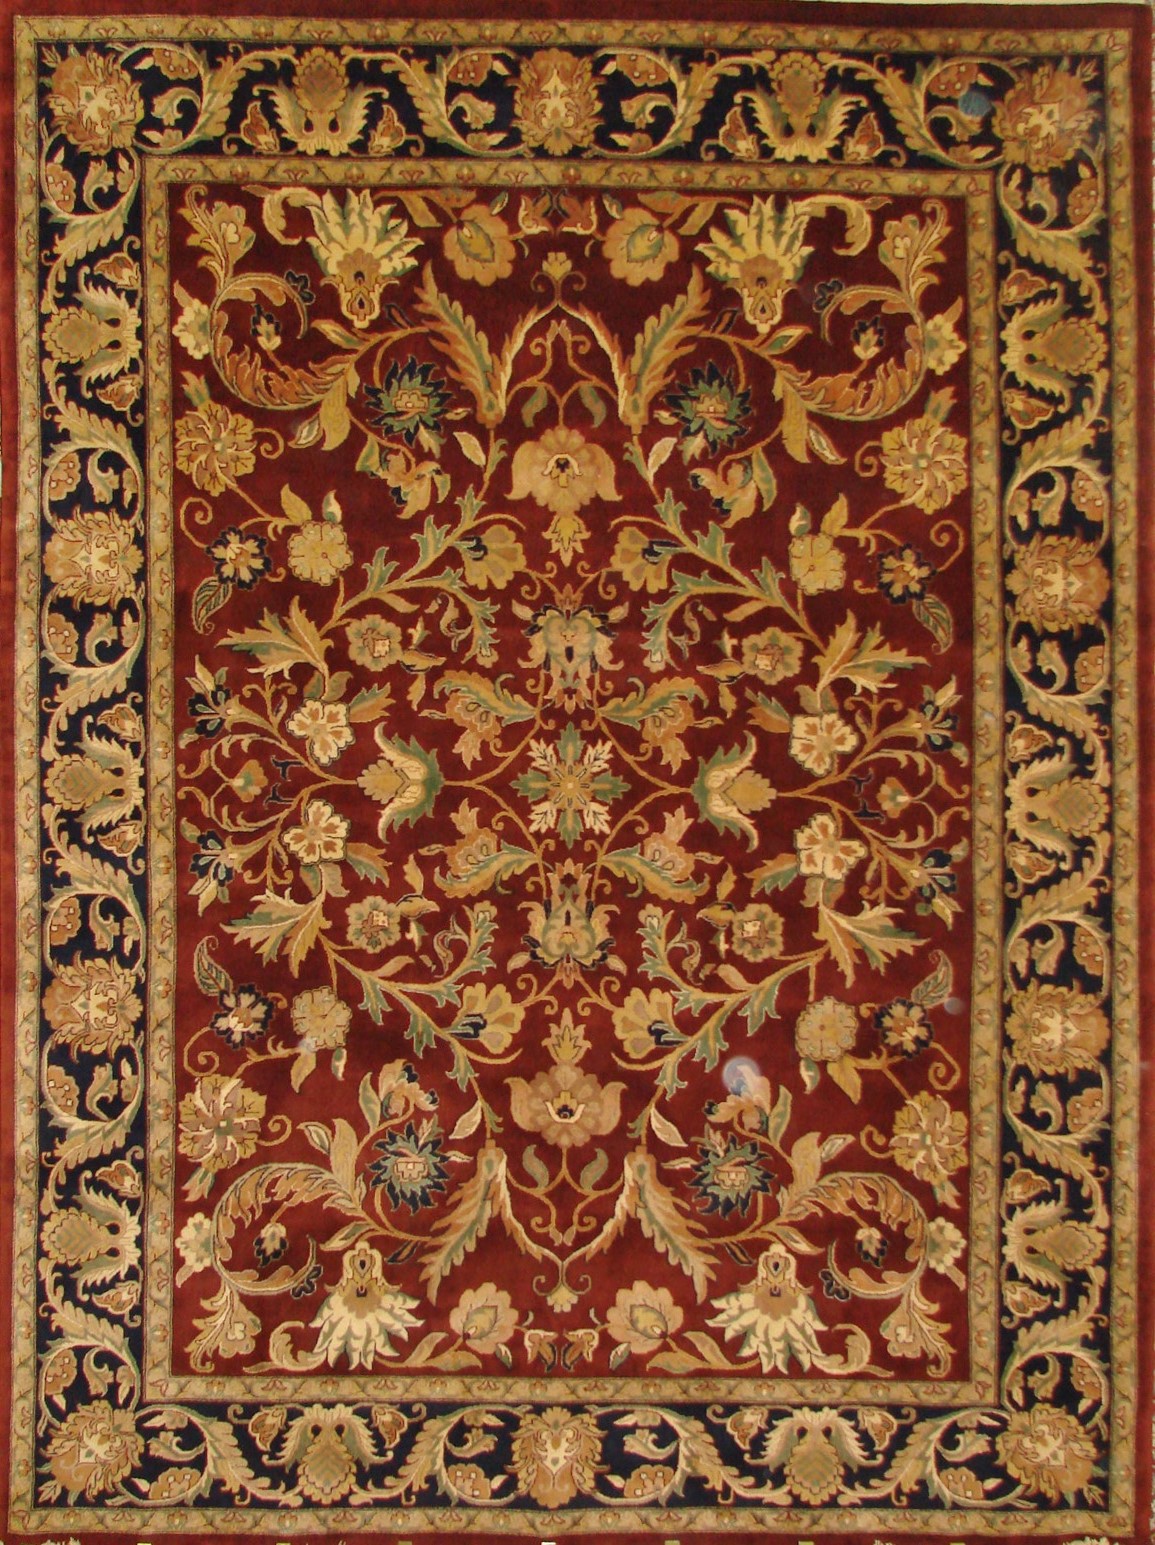 Clearance & Discount Rugs KASHAN-25 0110 Red - Burgundy & Medium Blue - Navy Hand Knotted Rug